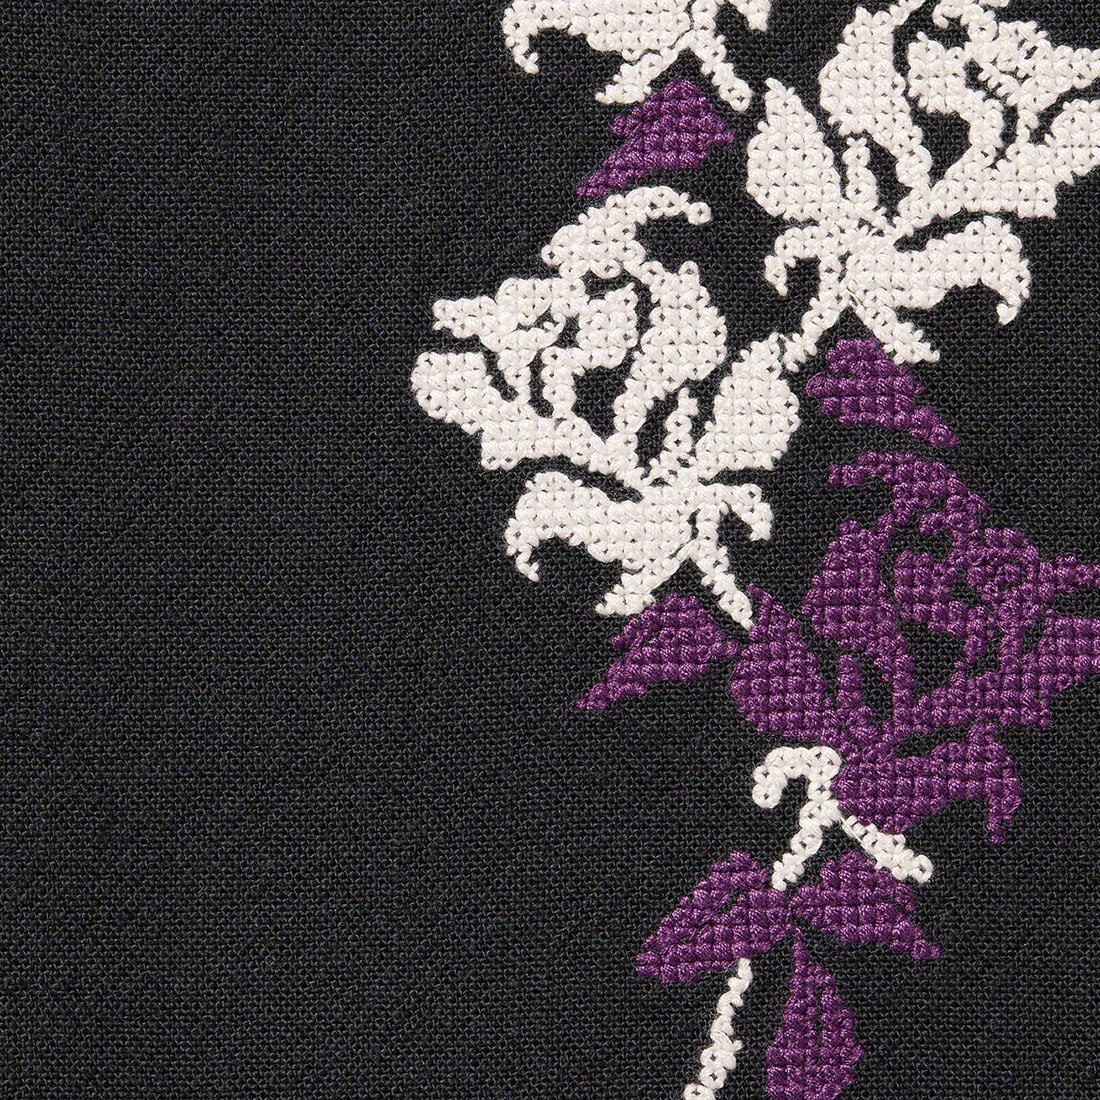 Details on Needlepoint S S Shirt Black from spring summer 2023 (Price is $158)